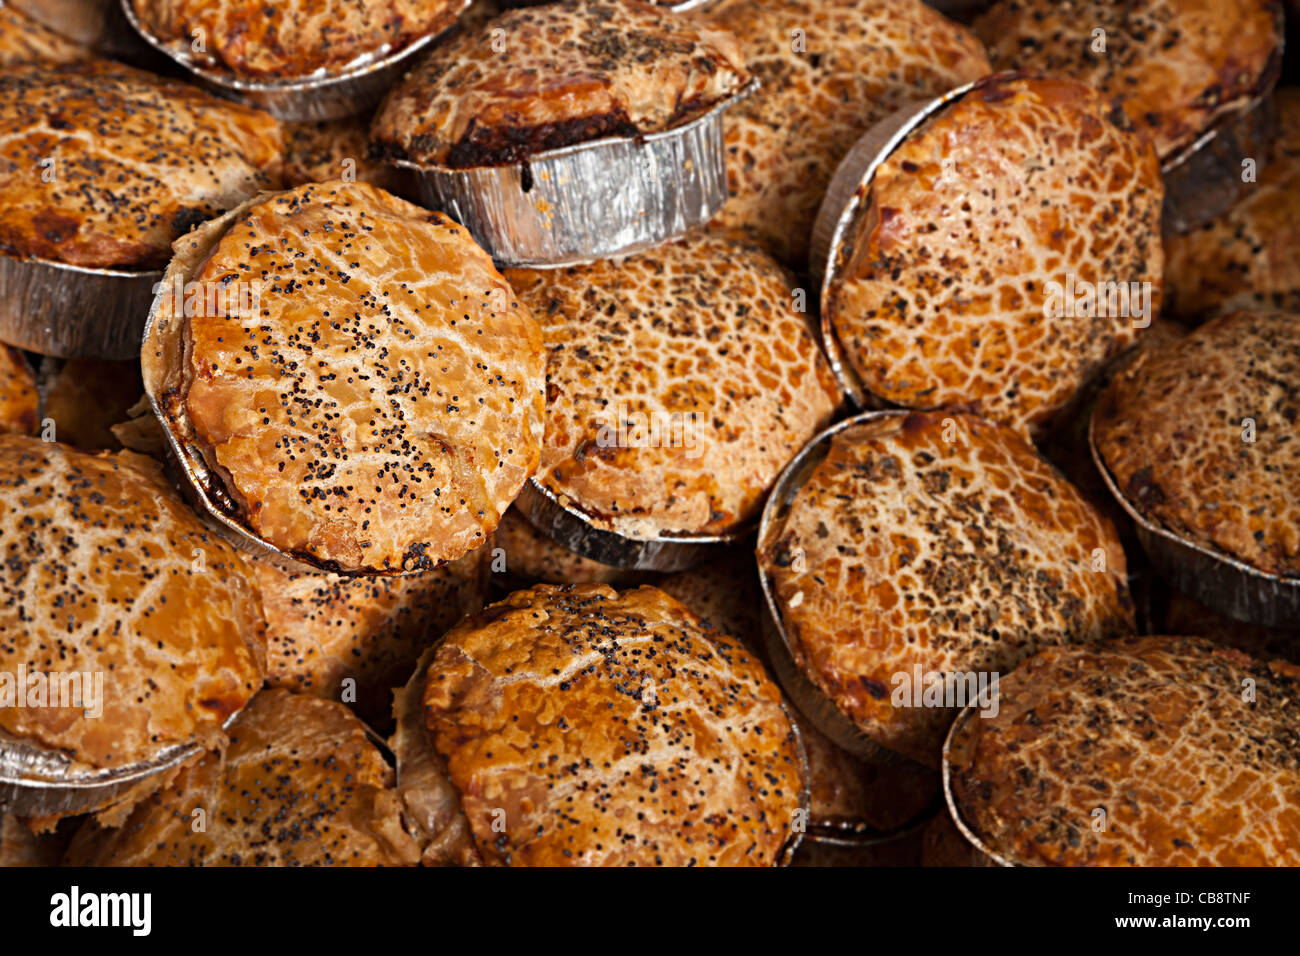 Meat pies on sale on market stall Wales UK Stock Photo